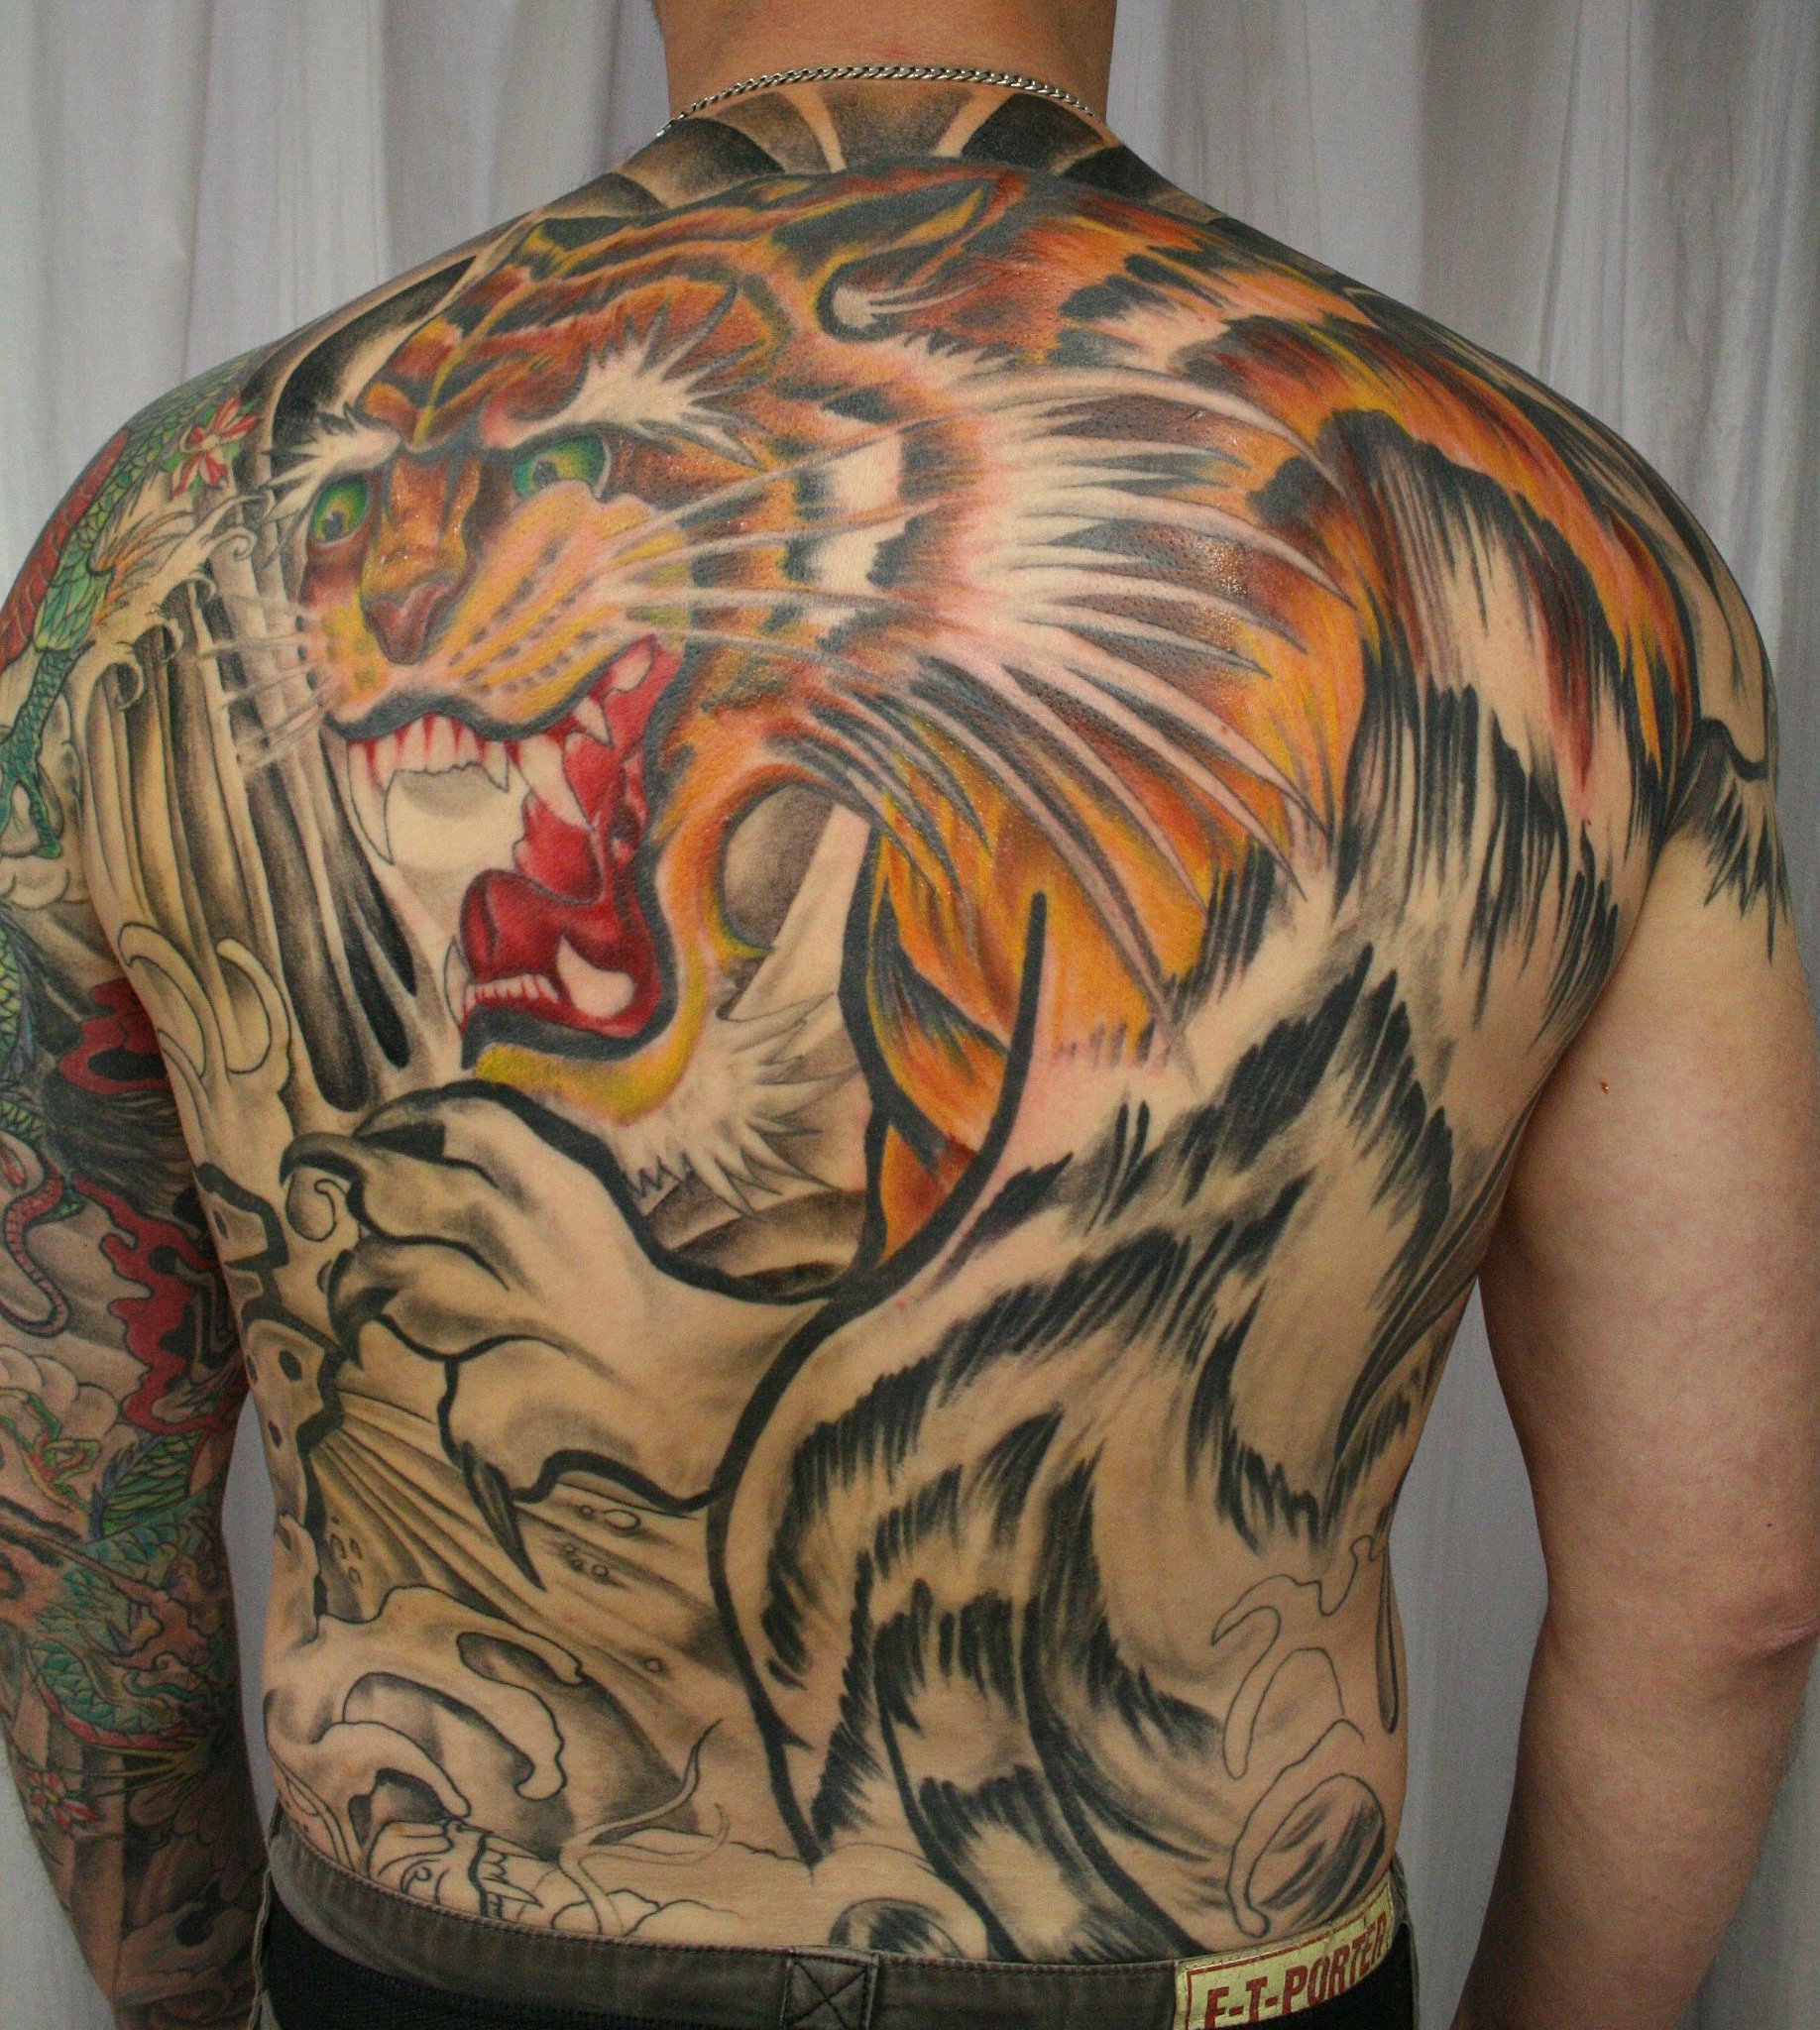  Yakuza  Tattoos  Designs Ideas and Meaning Tattoos  For You